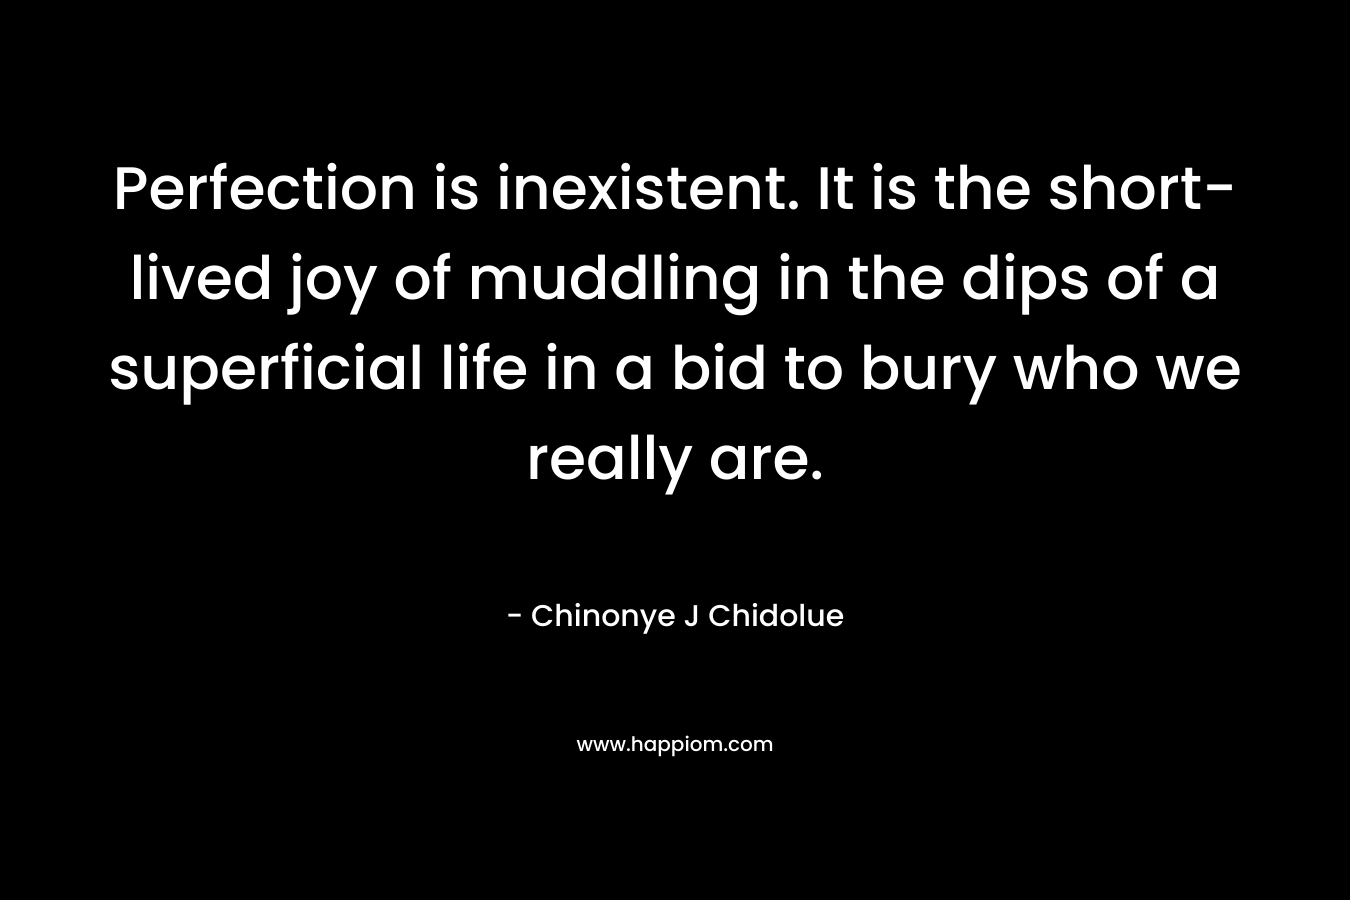 Perfection is inexistent. It is the short-lived joy of muddling in the dips of a superficial life in a bid to bury who we really are. – Chinonye J Chidolue